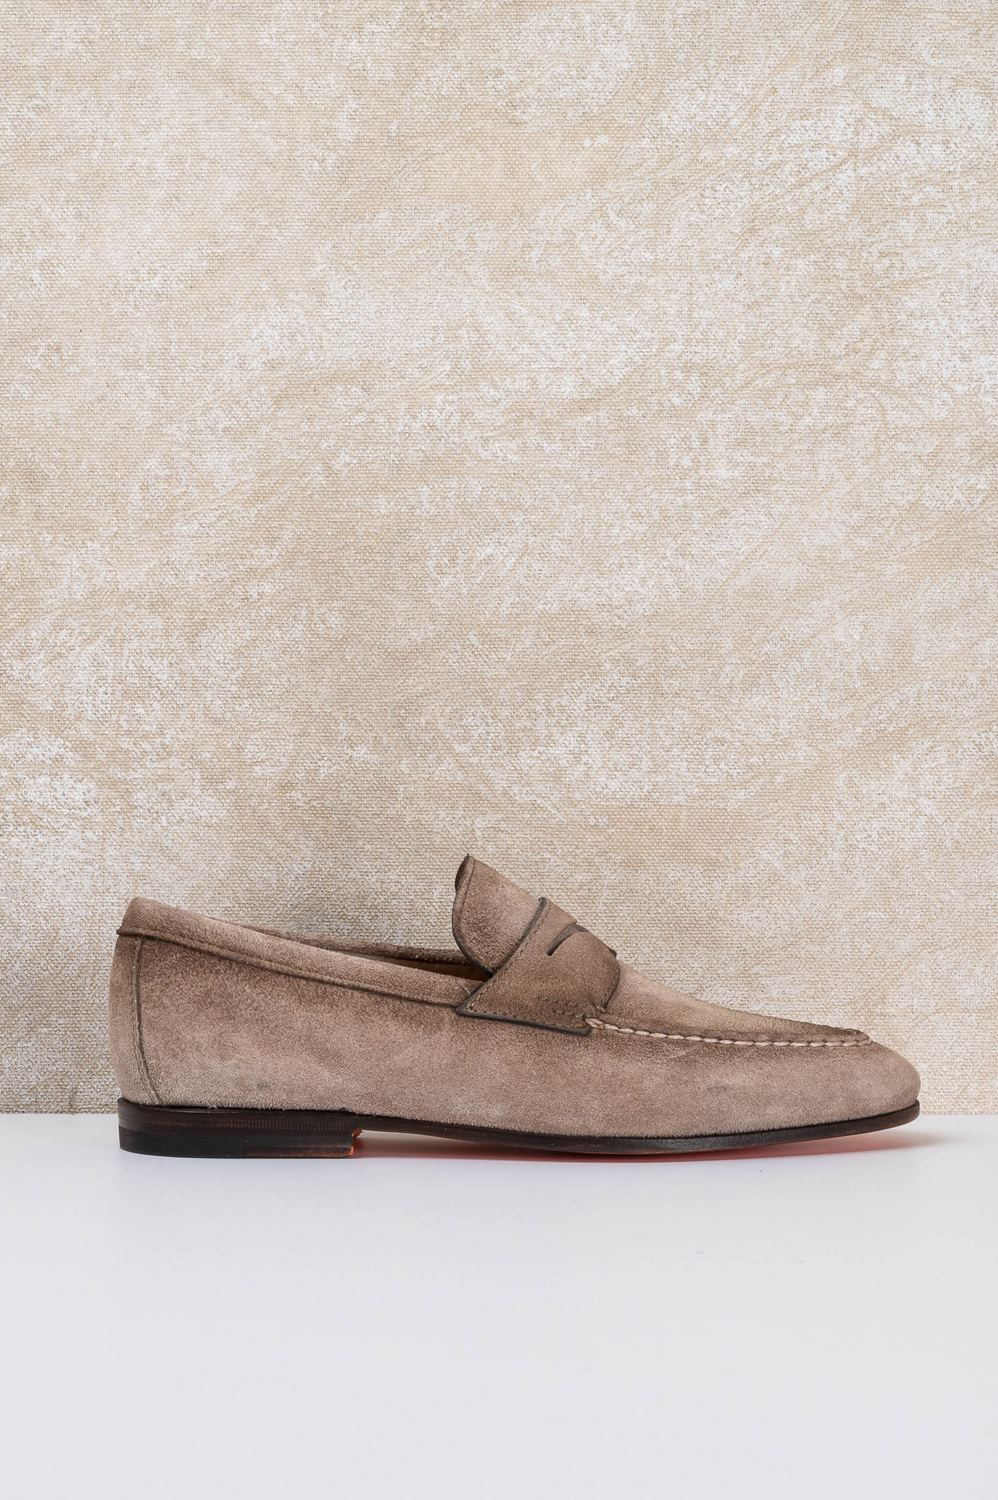 Suede penny loafer